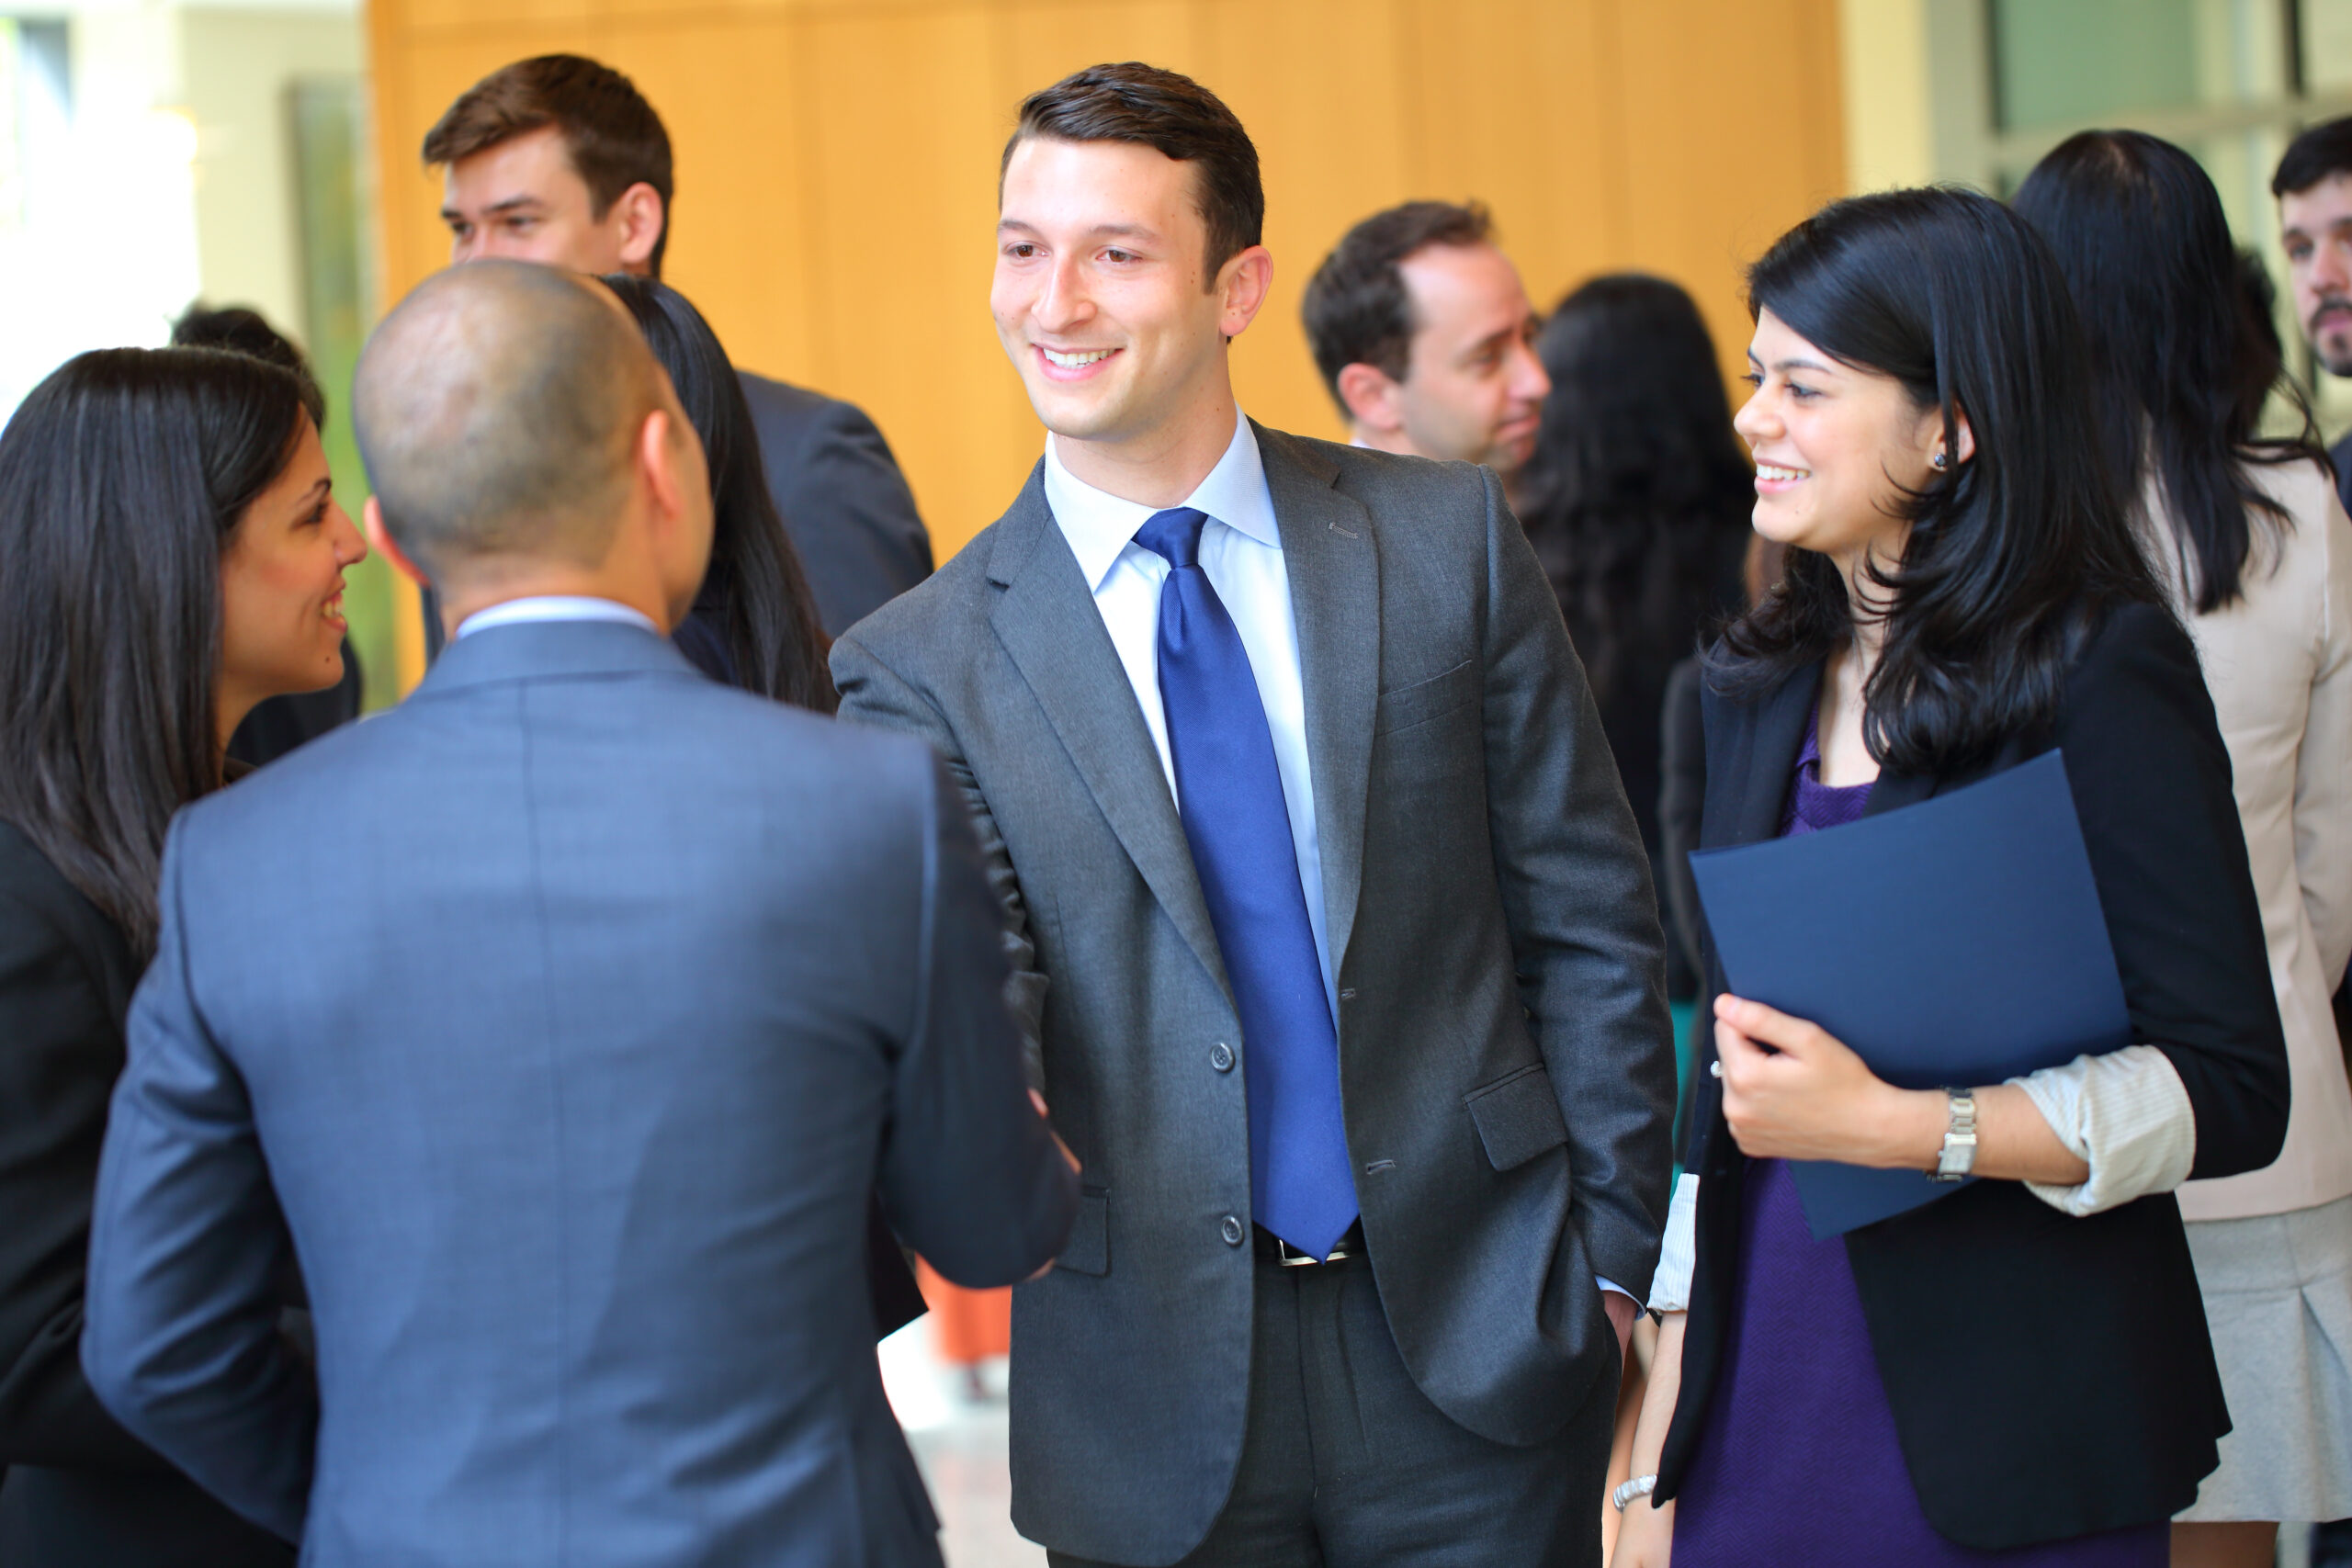 Wharton students in business professional attire shake hands with a recruiter at a career fair.